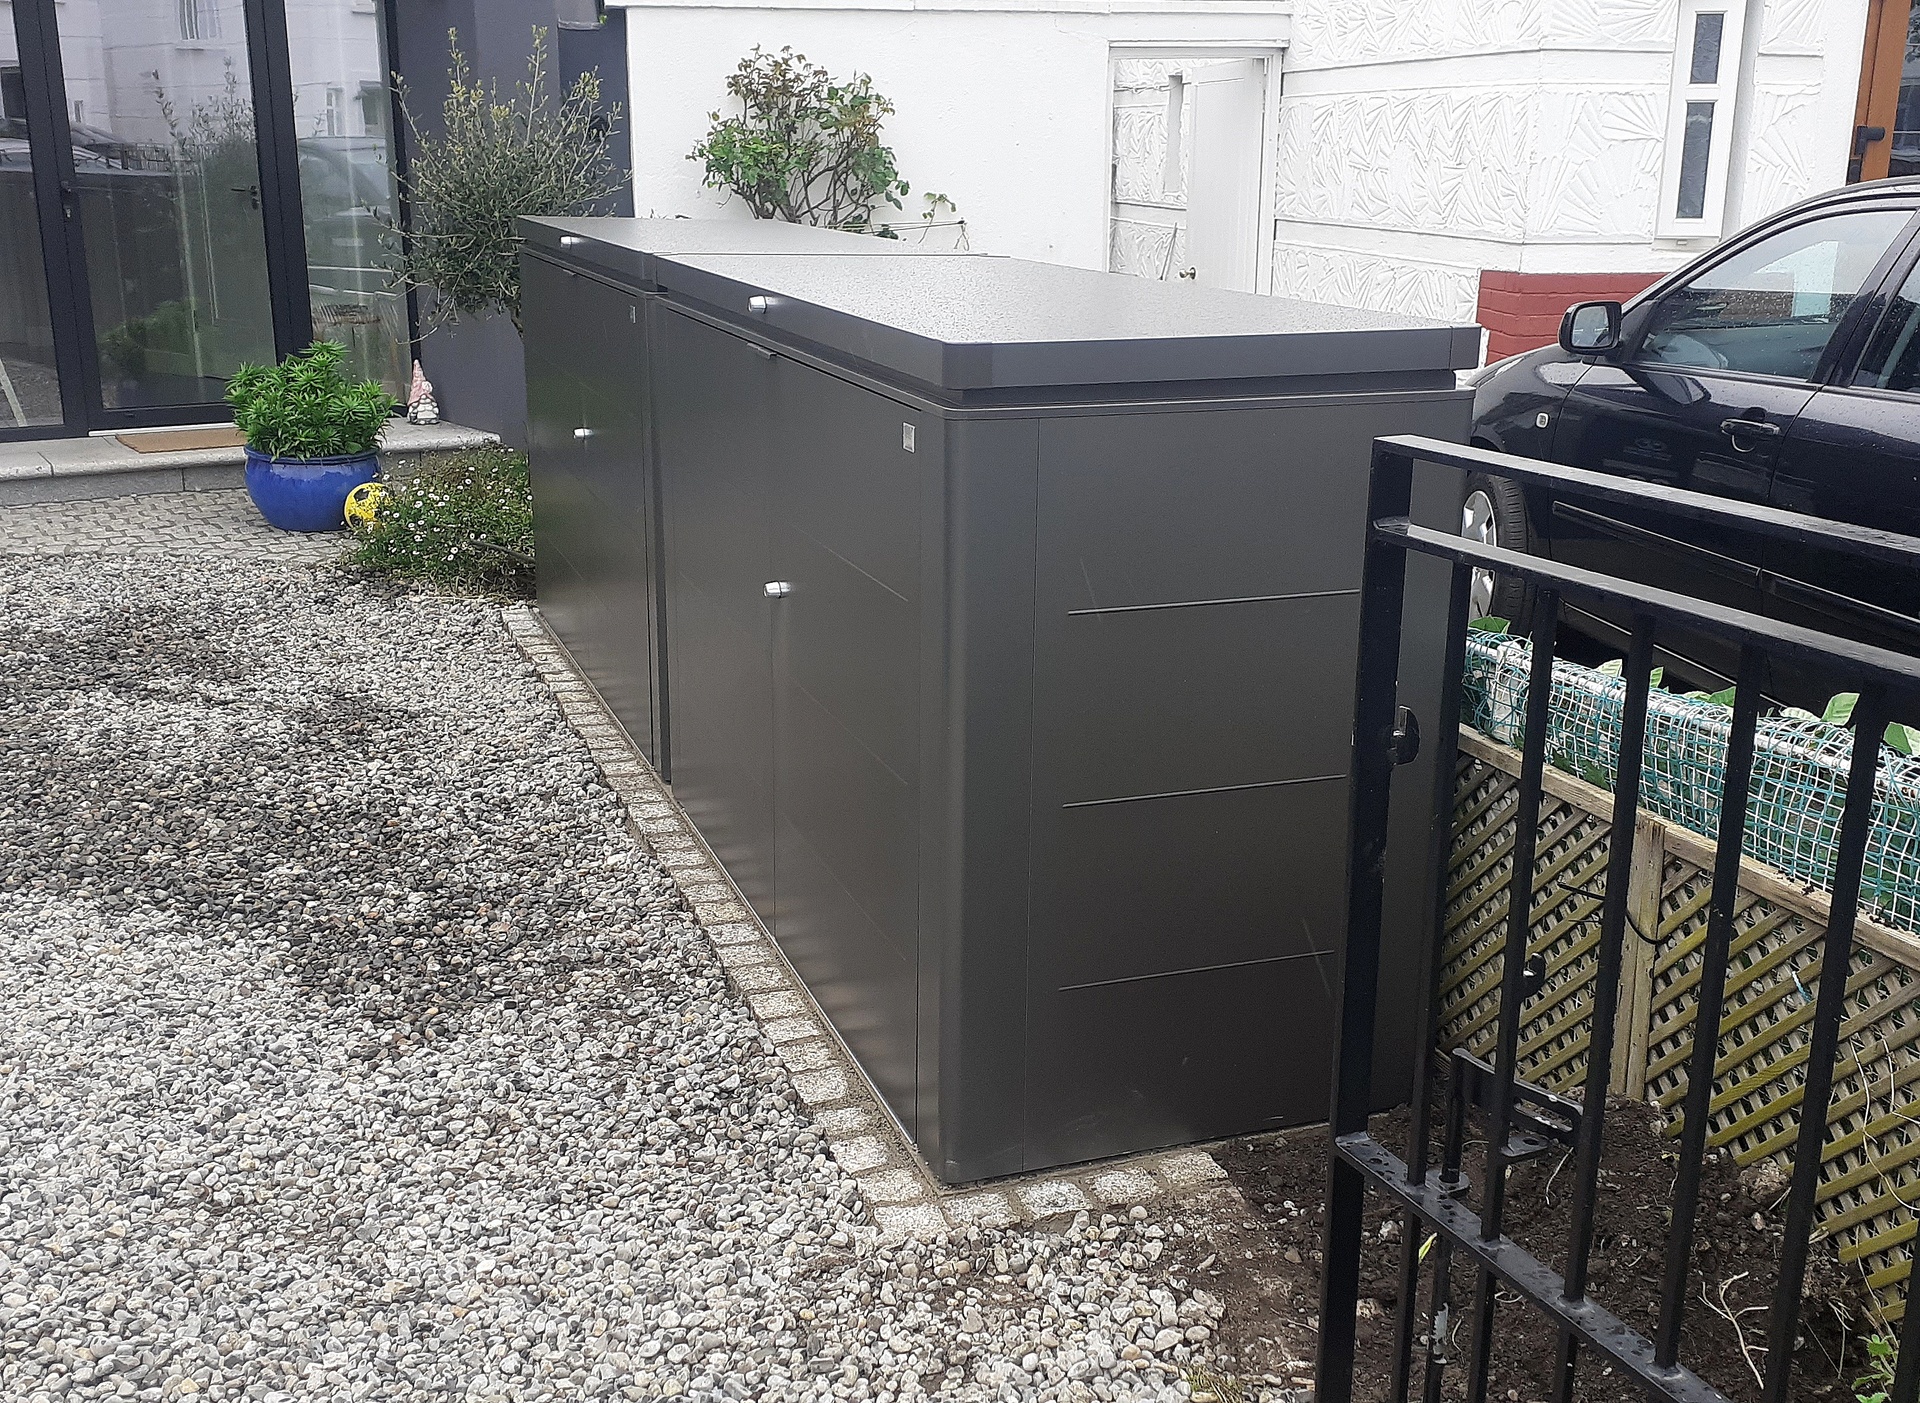 Biohort HighBoard 200 Storage Unit - a stylish & secure storage solution for Bins, Bikes etc  | Supplied + Fitted in Drumcondra, Dublin 9 by Owen Chubb Landscapers.